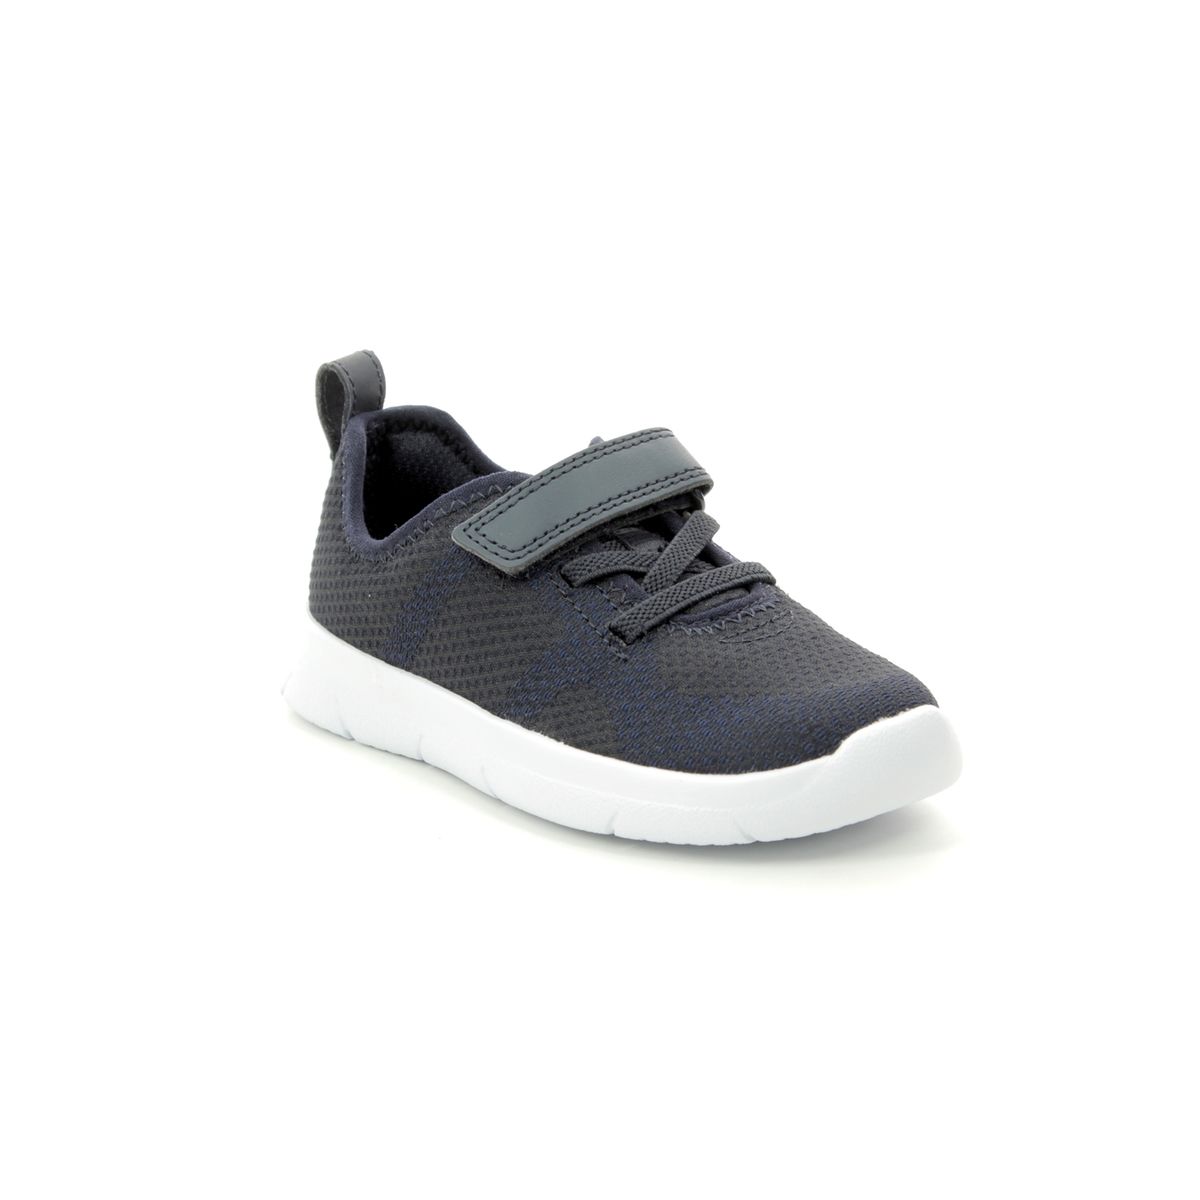 Clarks Ath Flux T Navy Kids Toddler Boys Trainers 412697G In Size 4.5 In Plain Navy G Width Fitting For kids